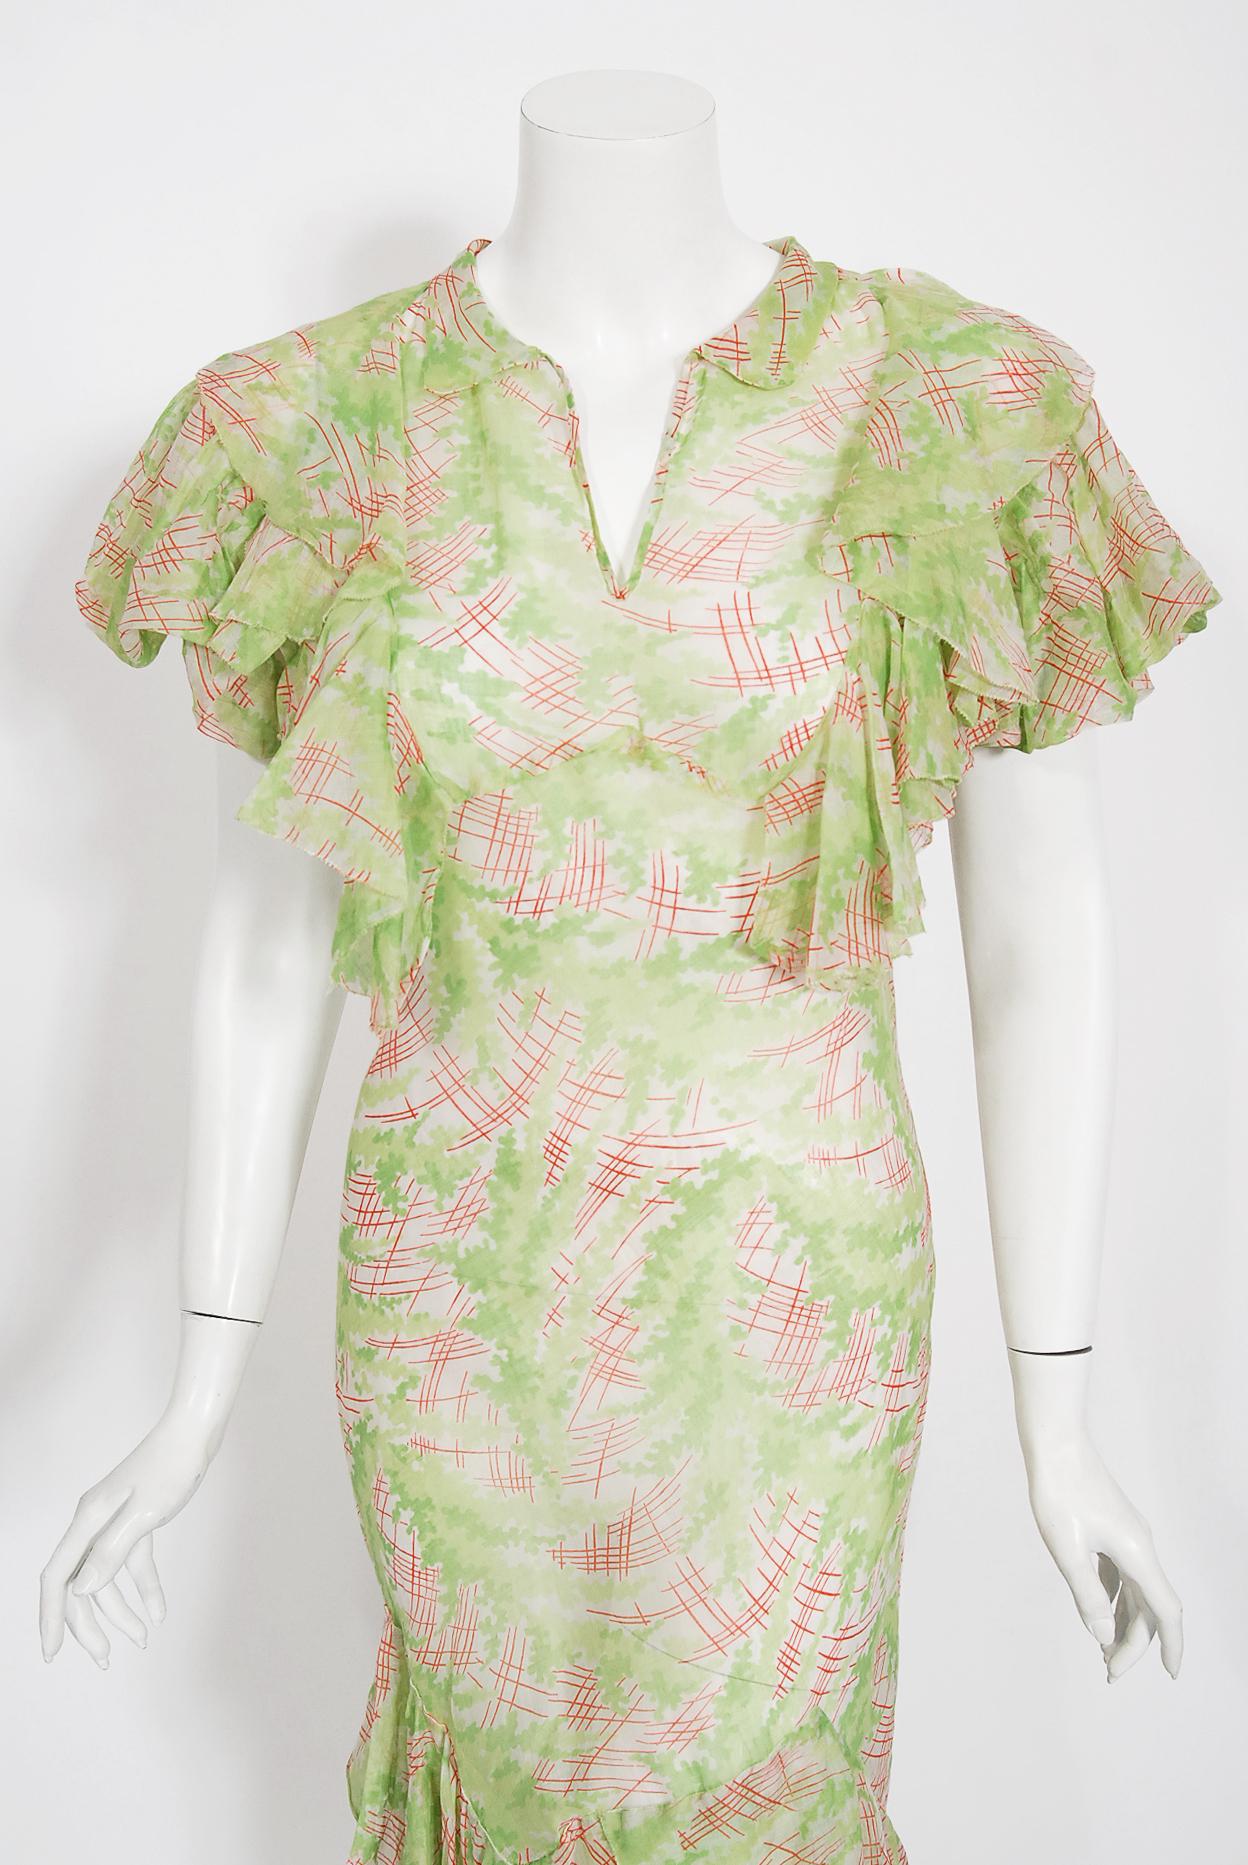 Undiminished by time, this mid 1930's lime-green and pink sheer organdy gown still has such flirty charm. This exceptional beauty is fashioned in the highest quality organdy with the most stunning abstract deco watercolor print. I love the gorgeous